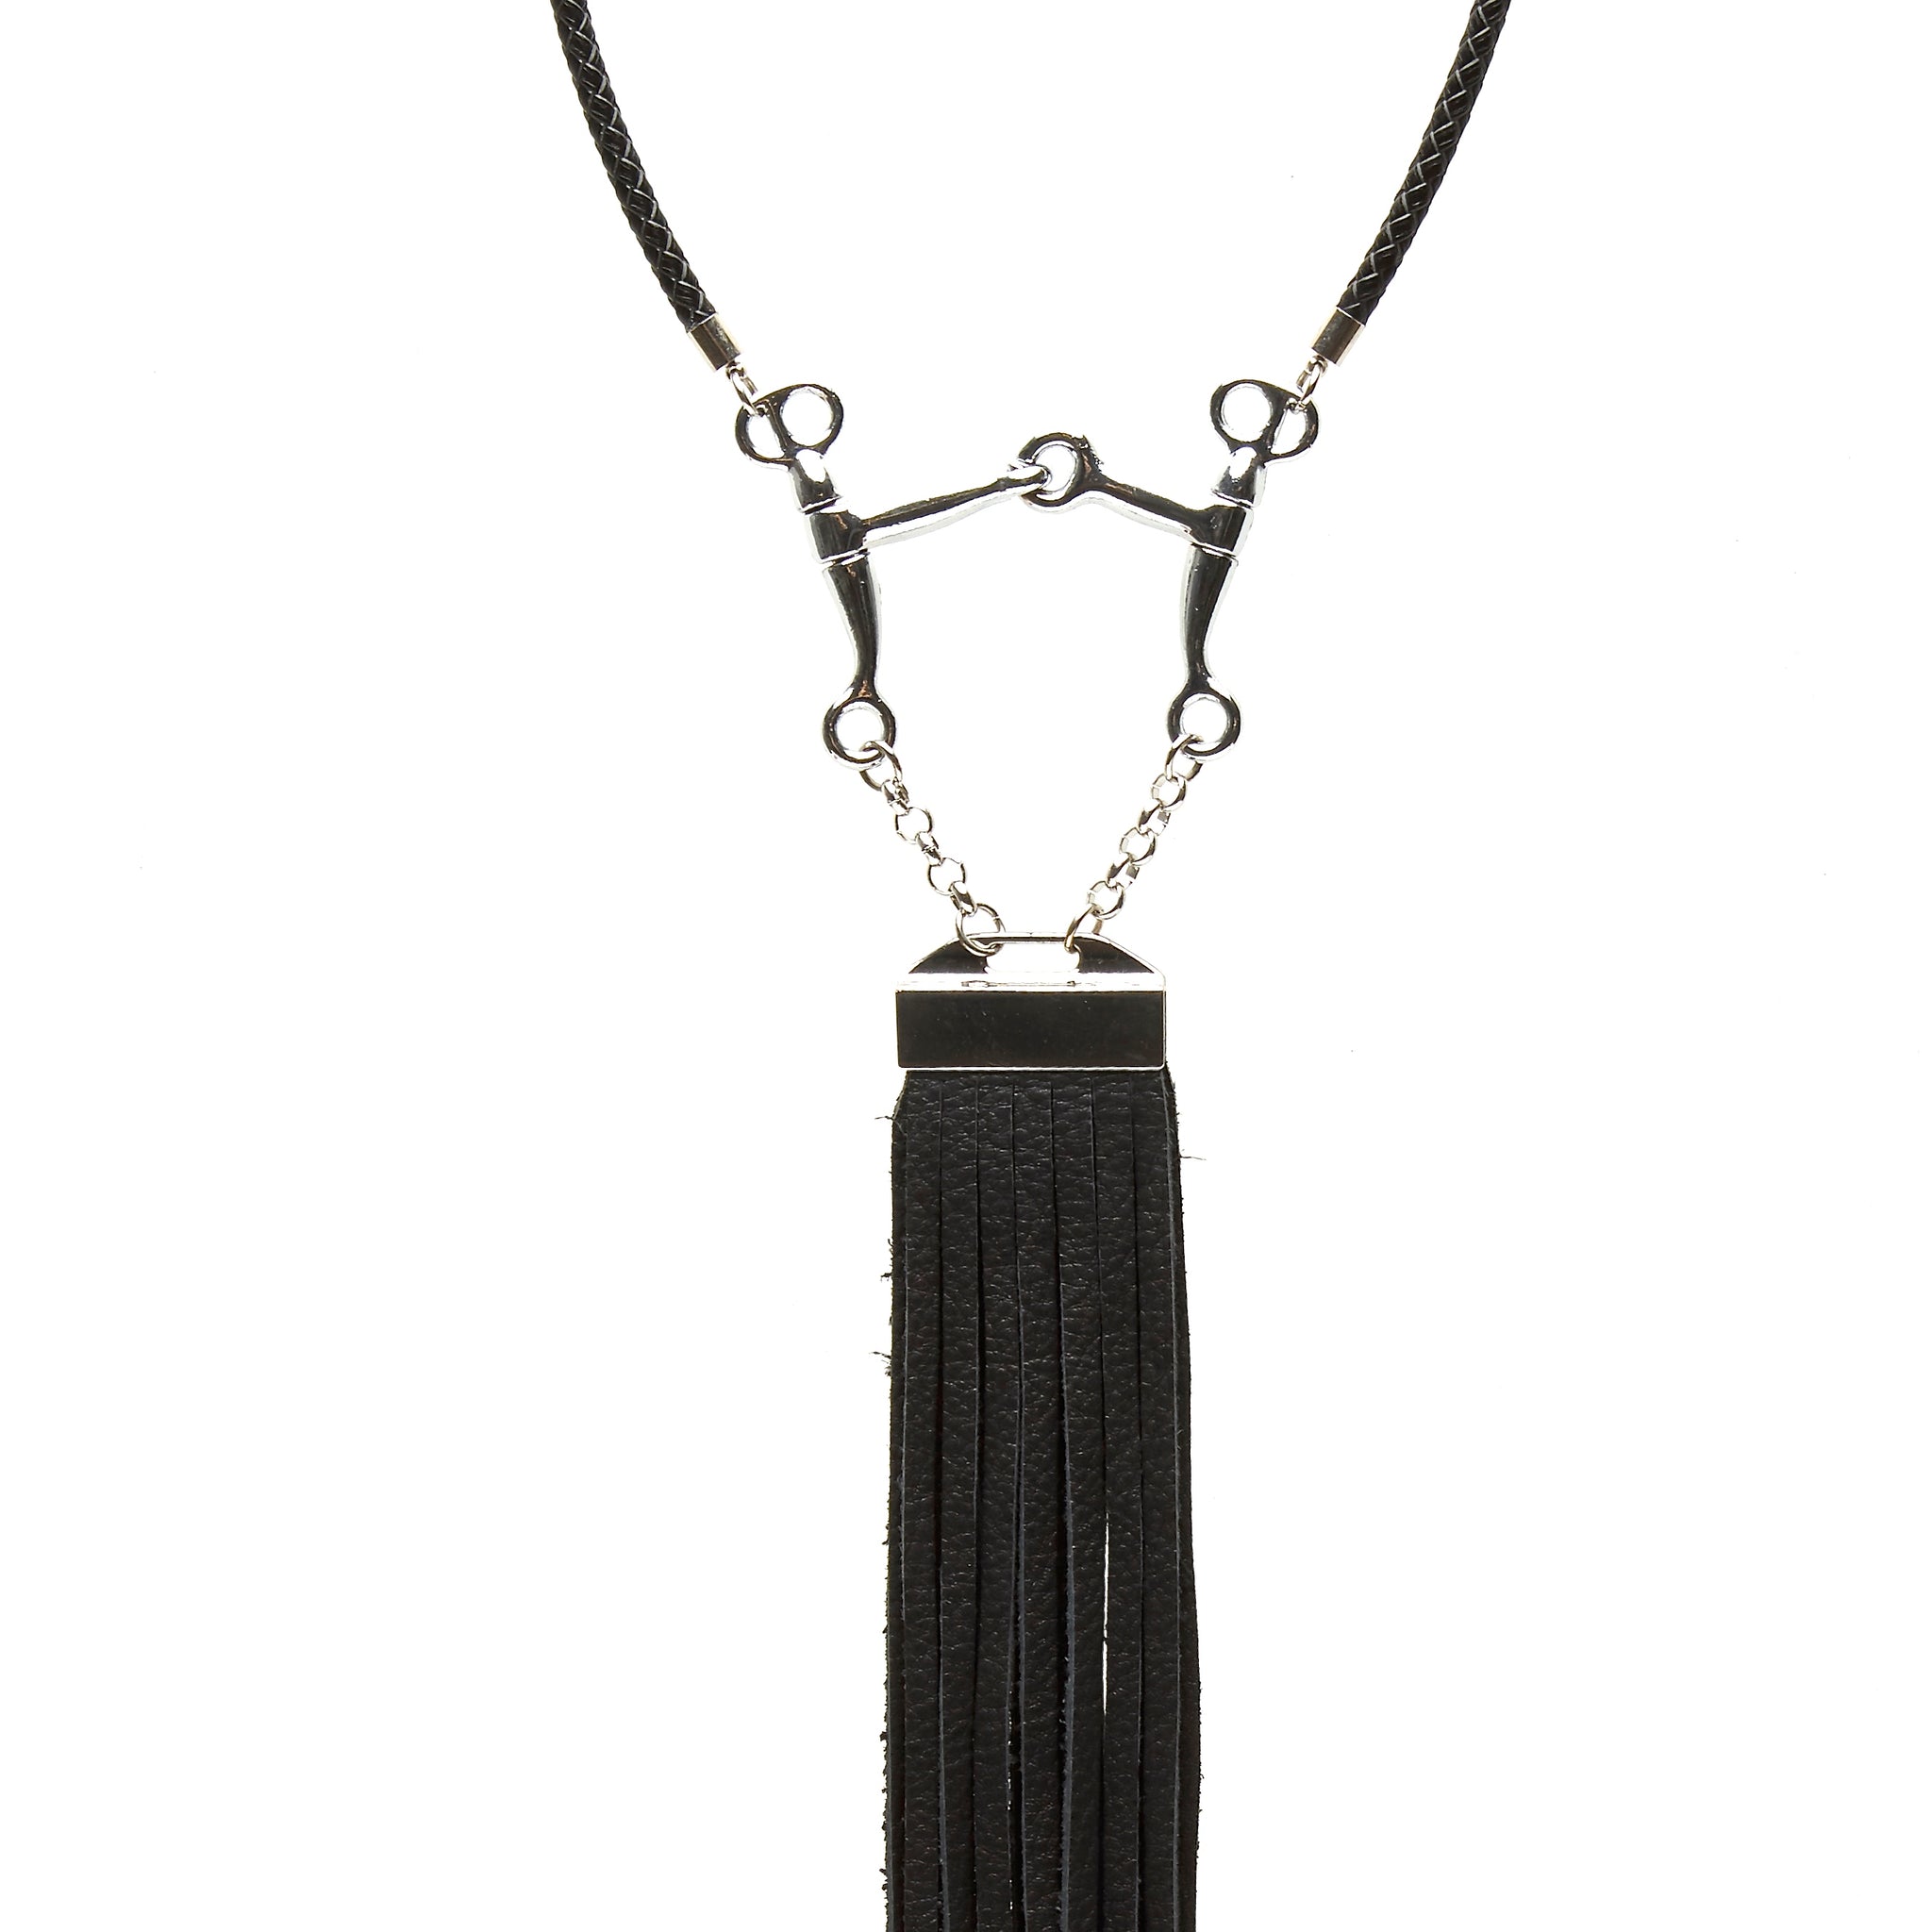 BRAIDED LEATHER CHOKER NECKLACE WITH PELHAM HORSE BIT PENDANT AND LONG DEERSKIN LEATHER FRINGE